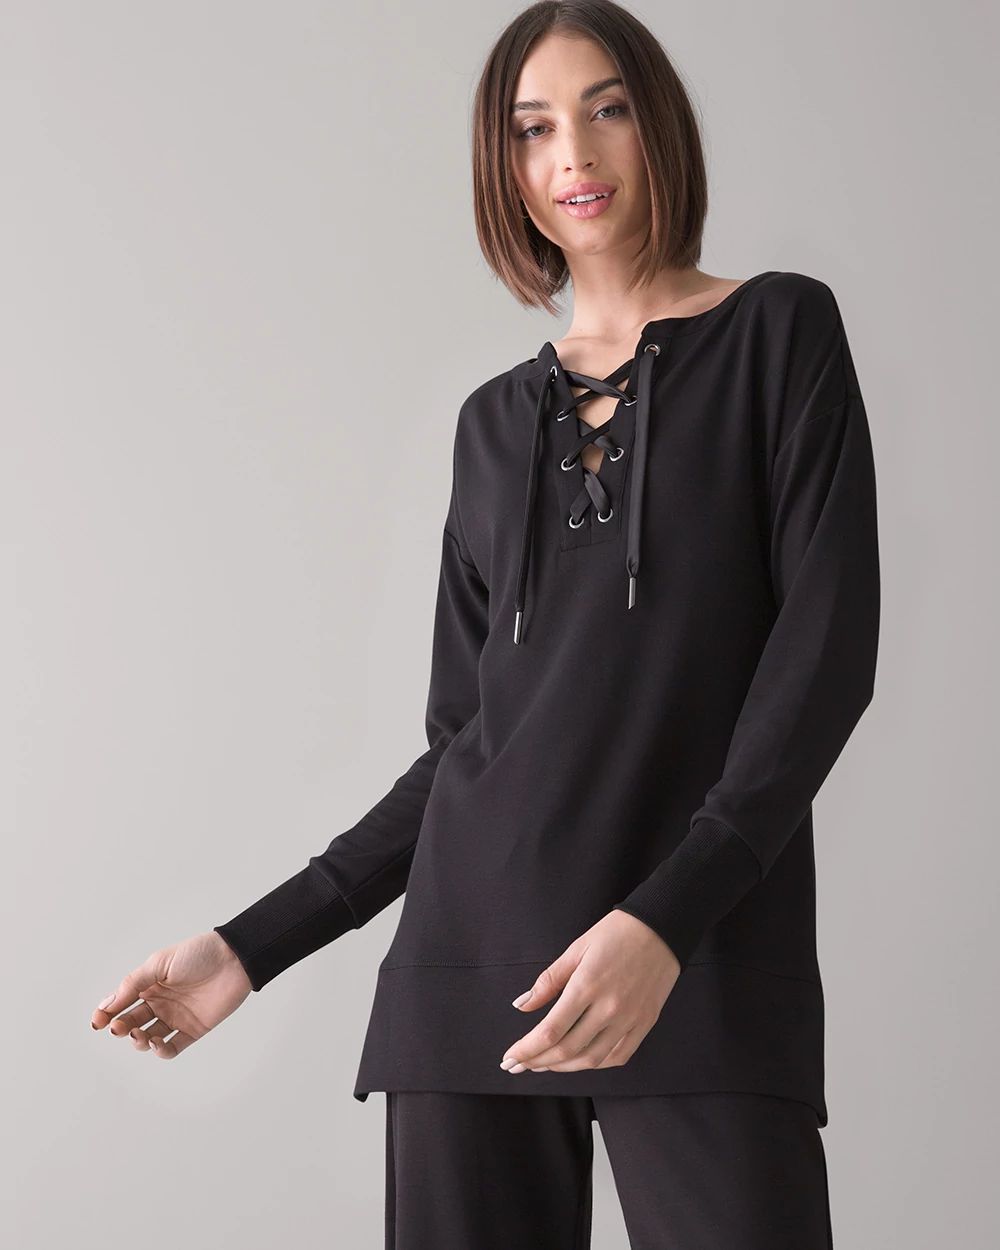 Petite Lace Up Tunic click to view larger image.